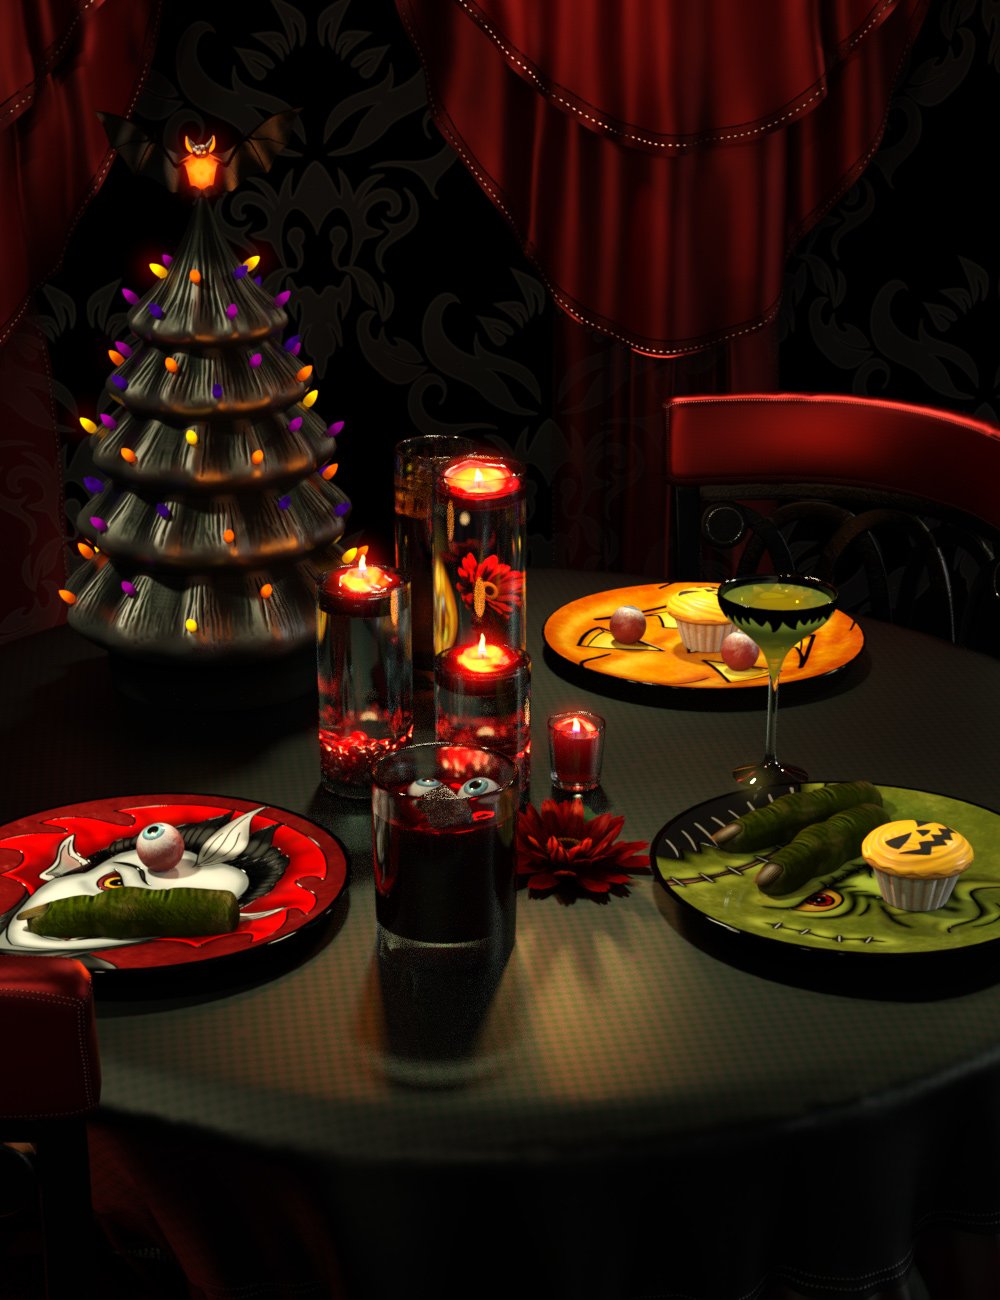 Halloween Fright Table Decor by: ARTCollab, 3D Models by Daz 3D